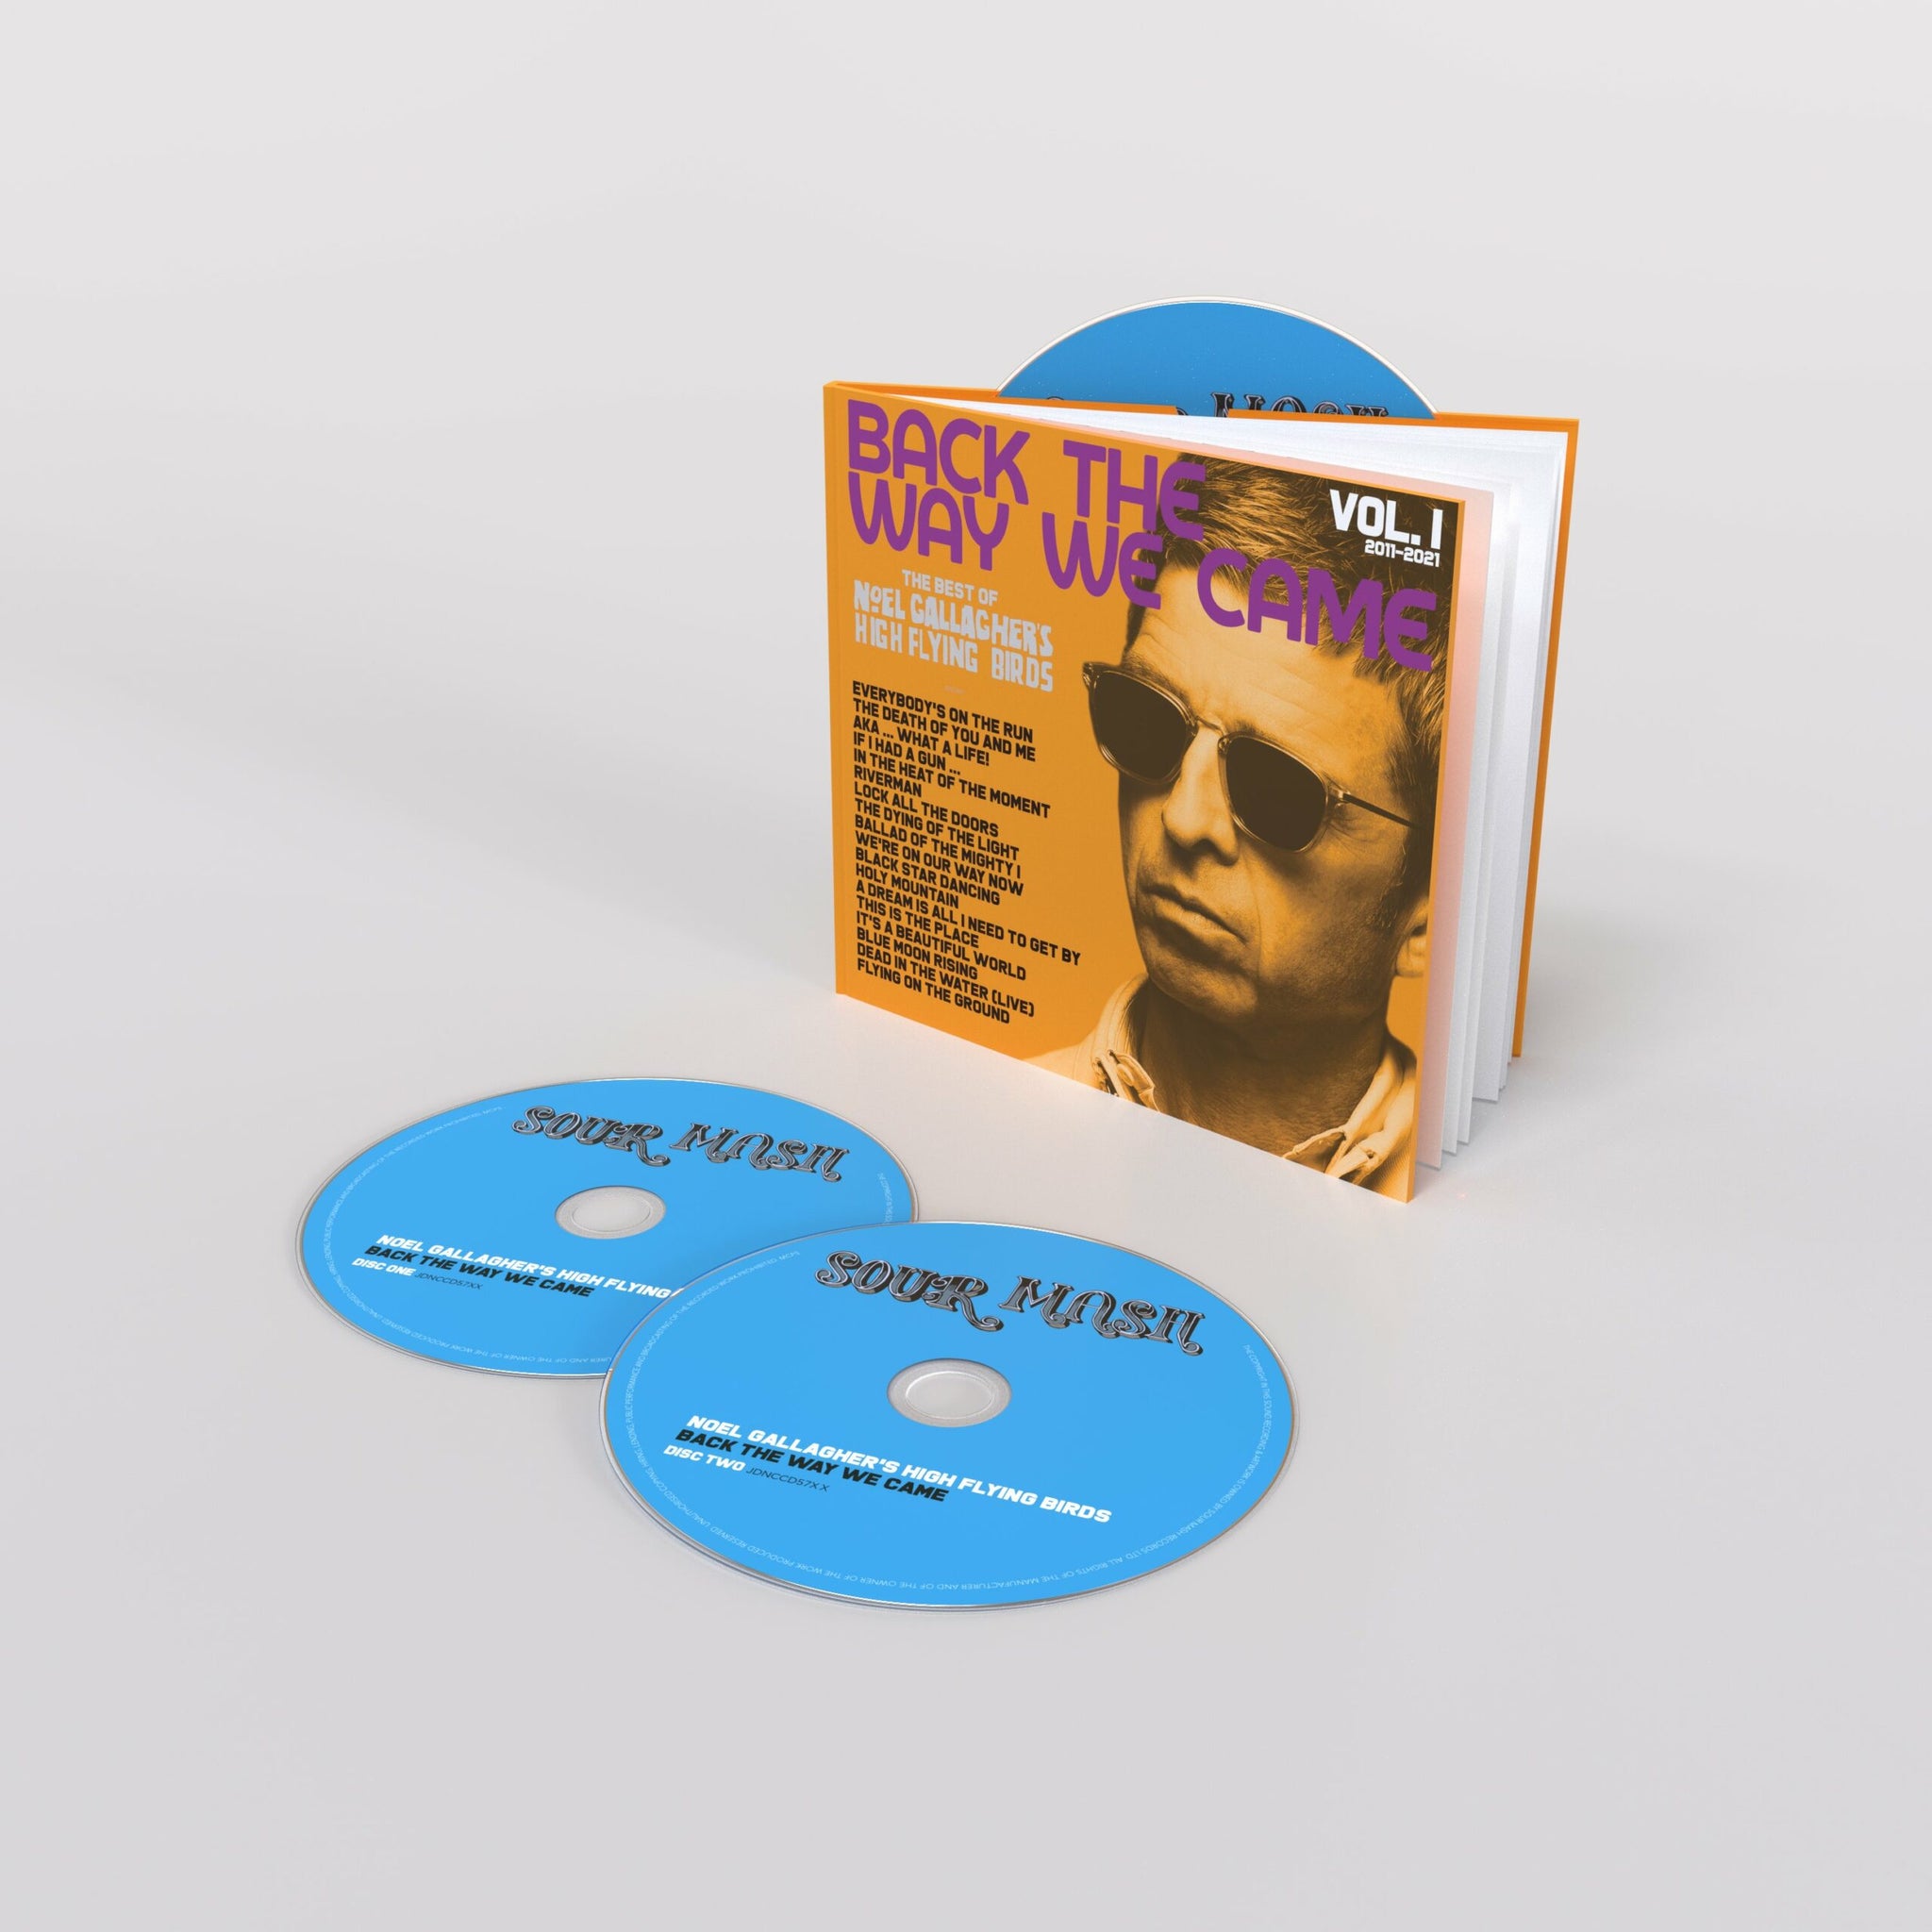 NOEL GALLAGHER'S HIGH FLYING BIRDS - The Best Of: Back The Way We Came Vol. 1 (2011-2021) - Deluxe Edition 3CD Set